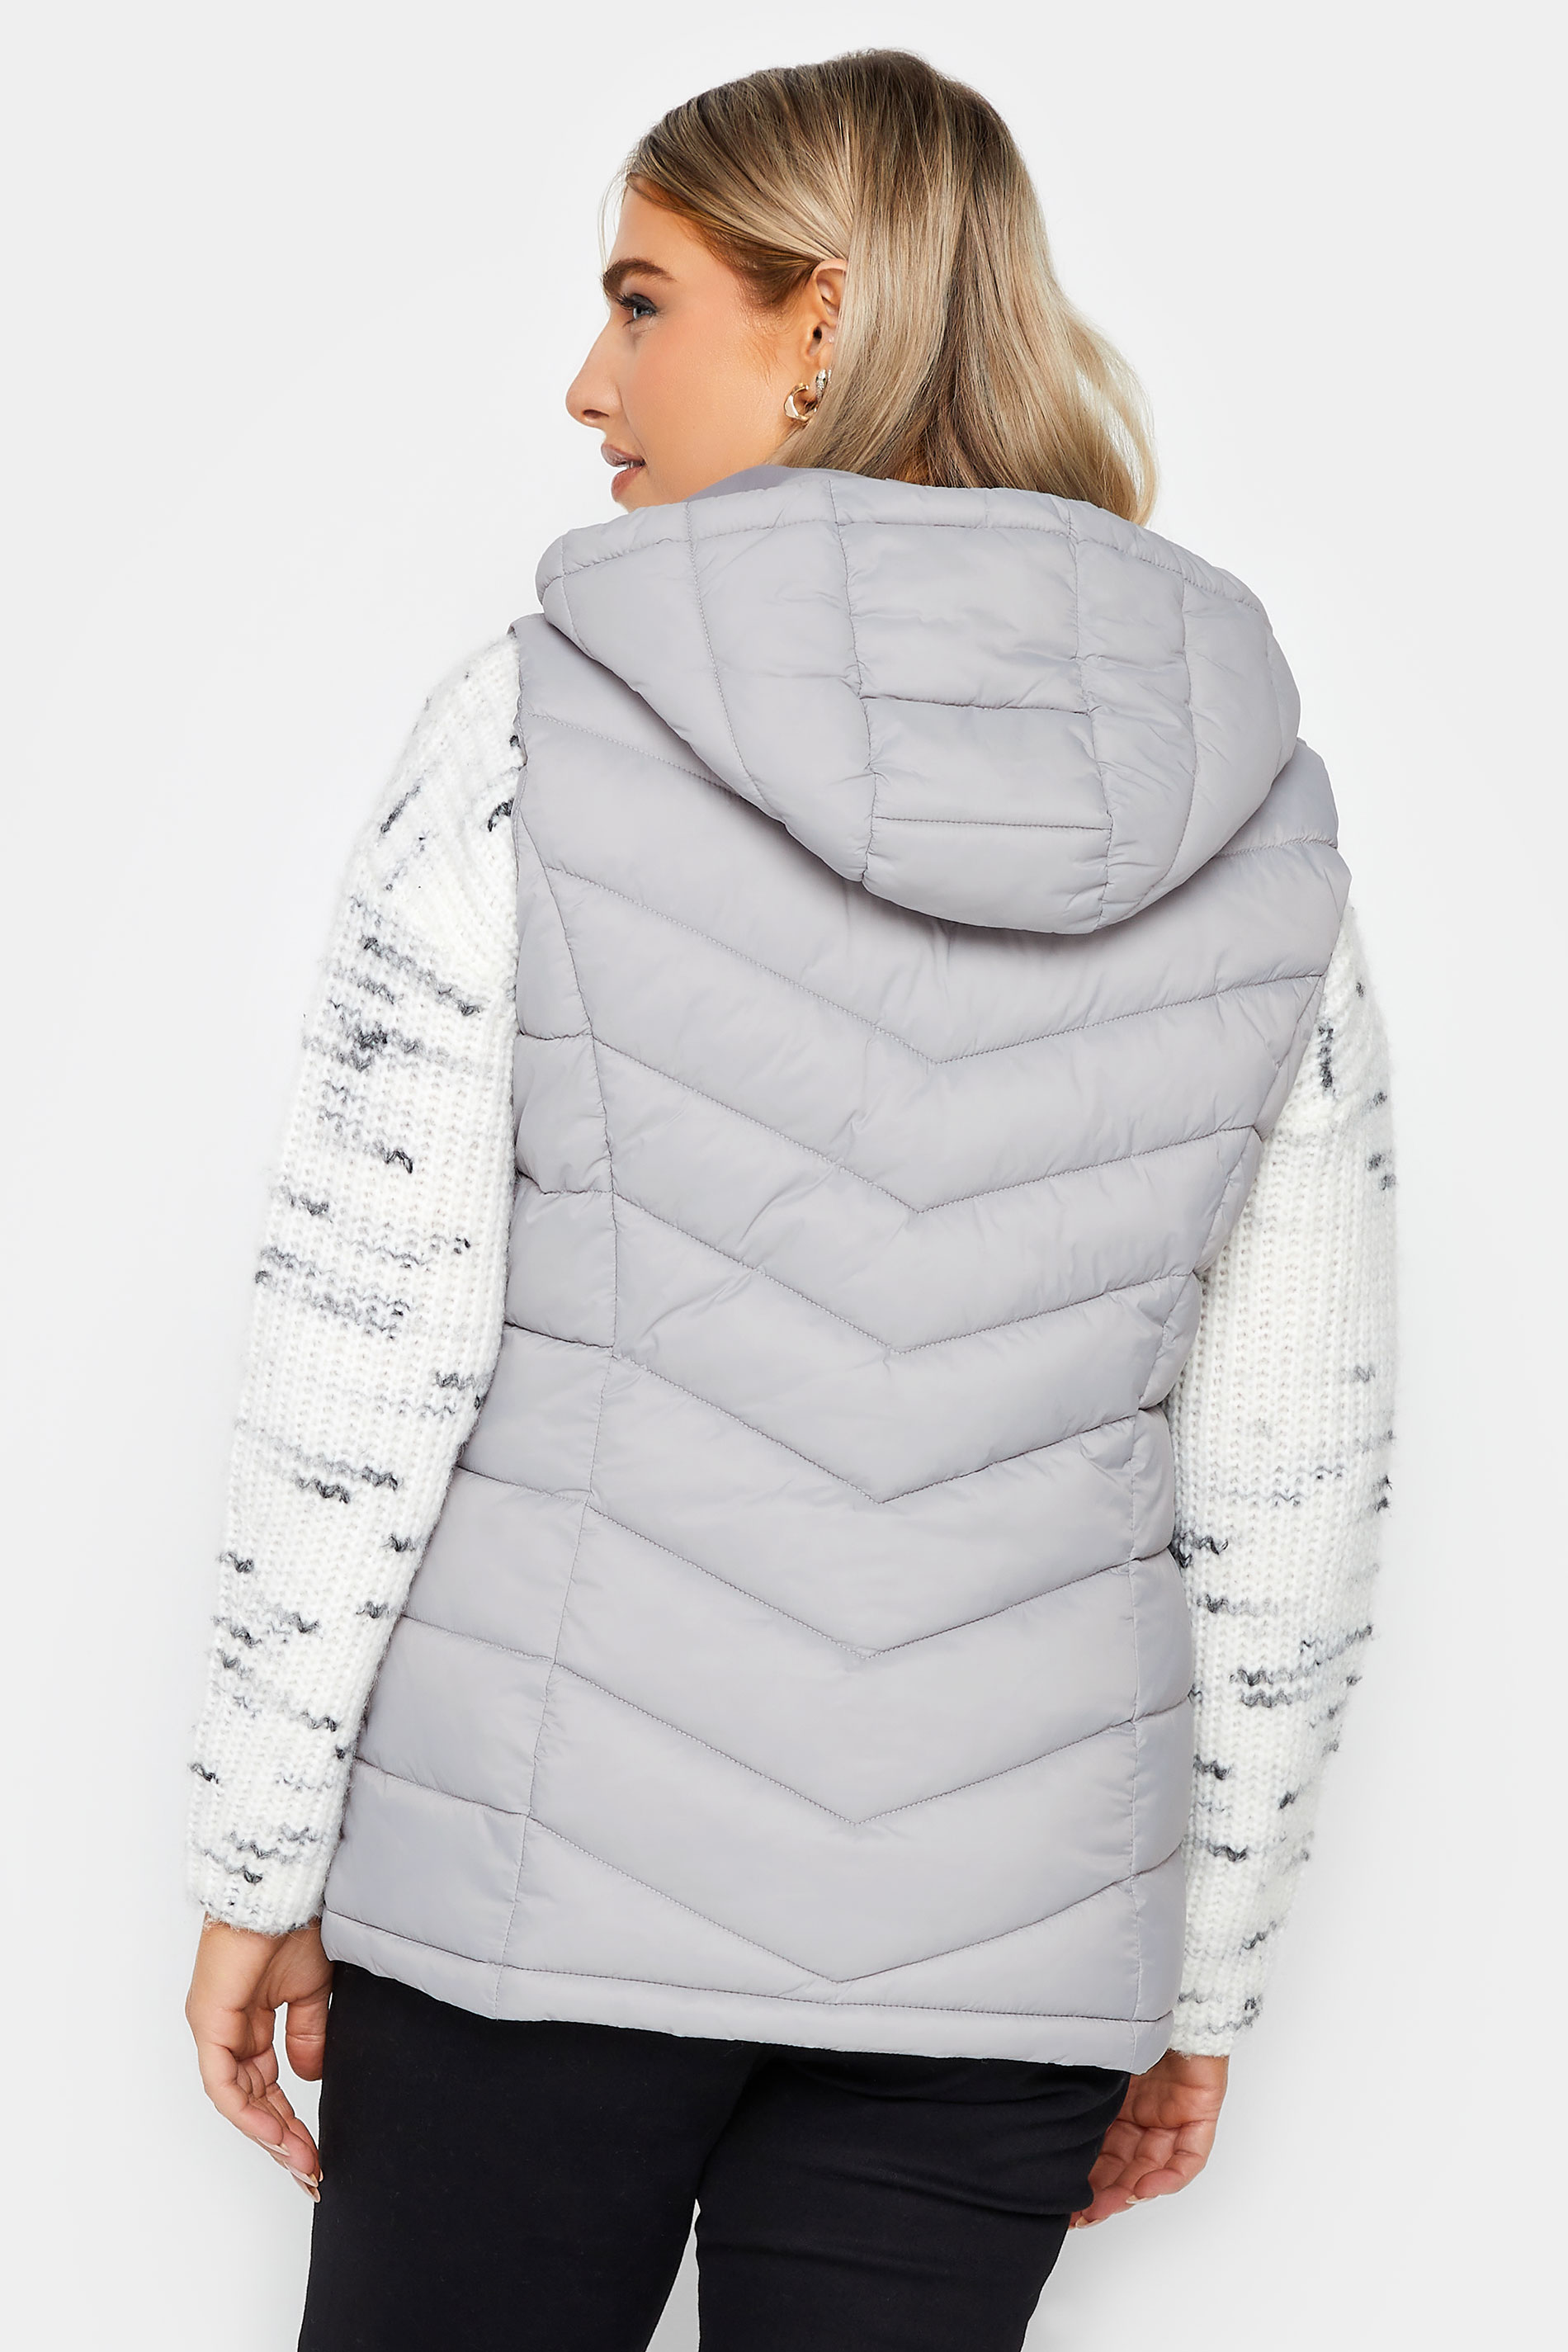 M&Co Grey Quilted Gilet | M&Co 3